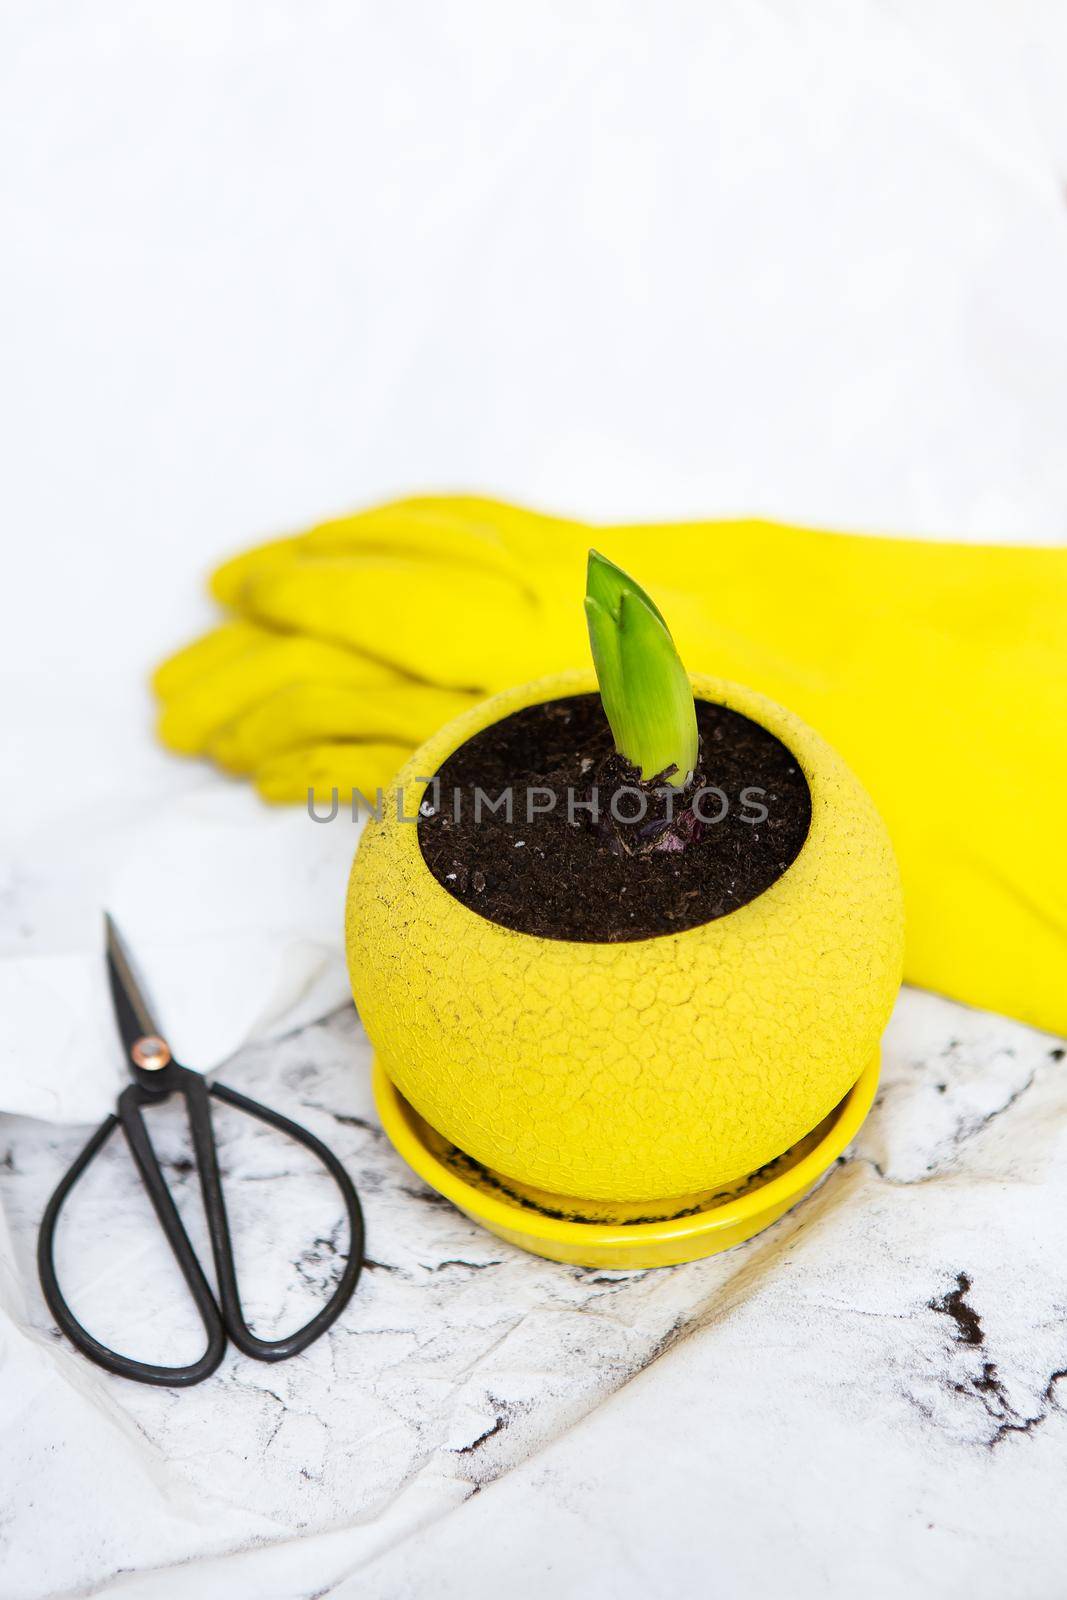 Transplanting hyacinth bulbs into a yellow pot, gardening tools lie on the background, yellow gloves. by sfinks